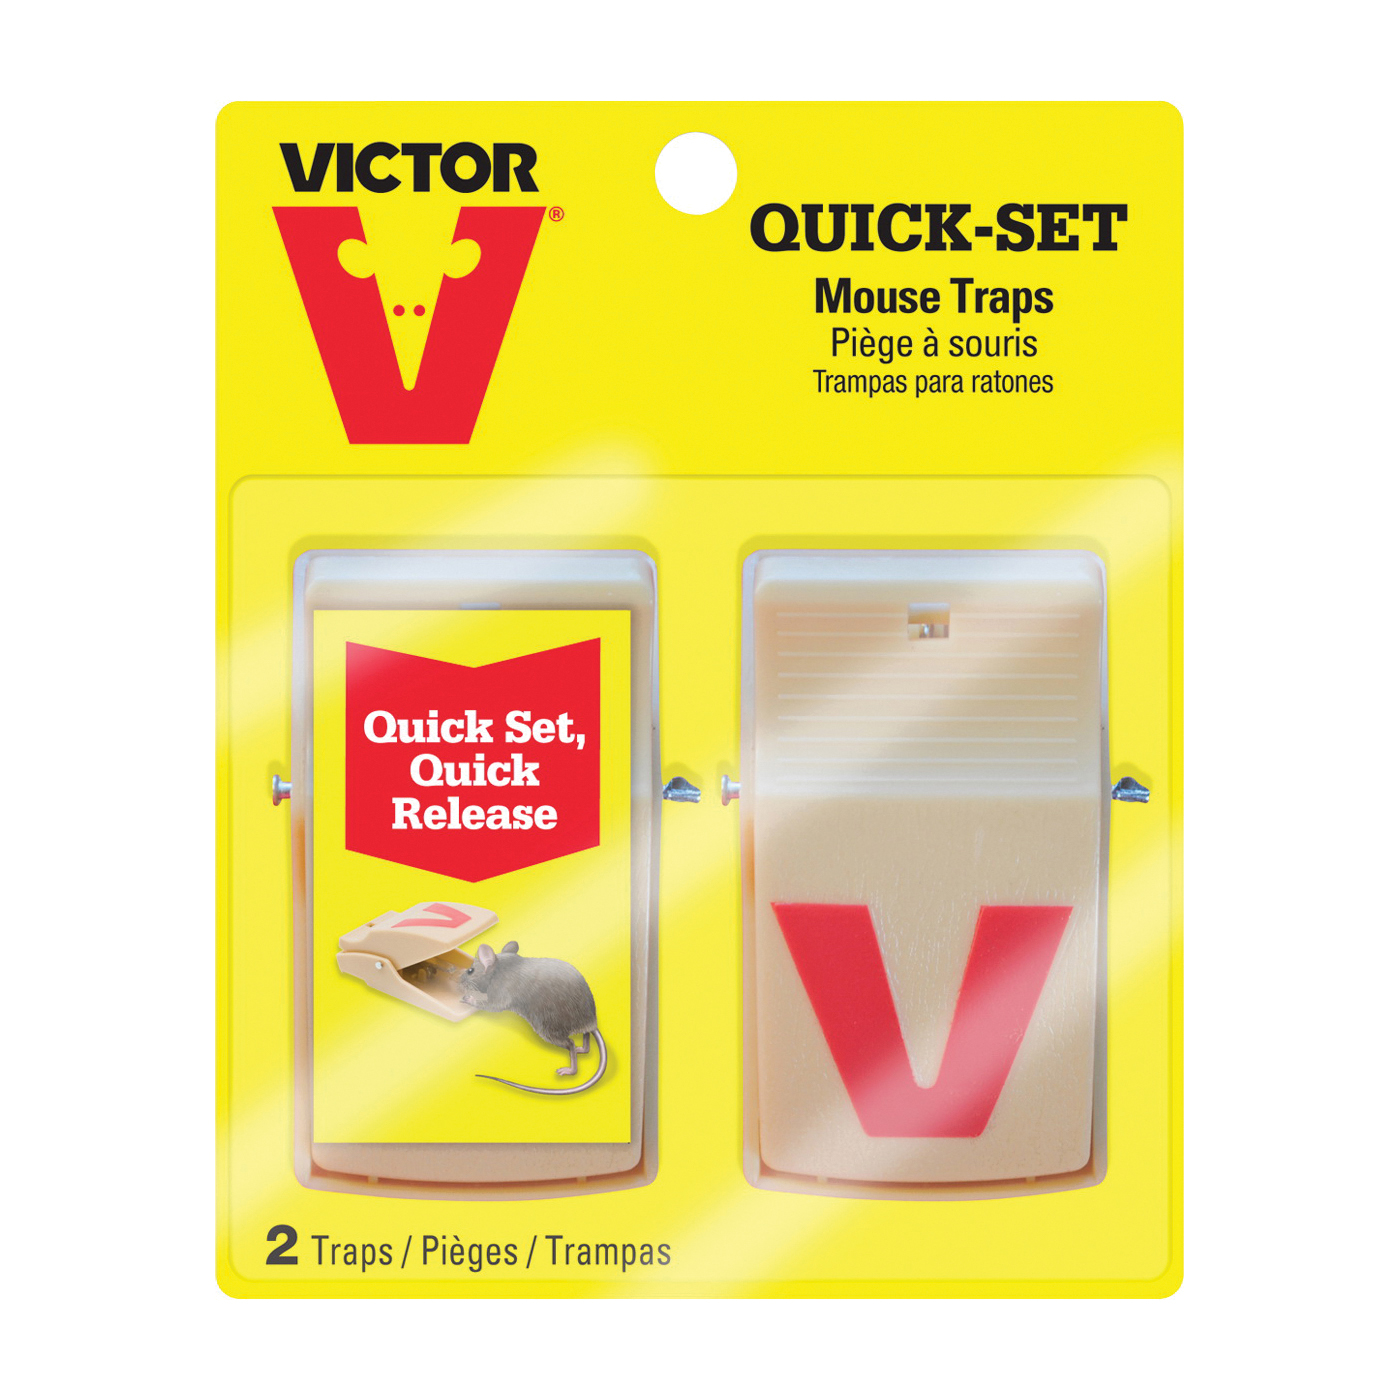 VICTOR EASY SET MOUSE TRAP